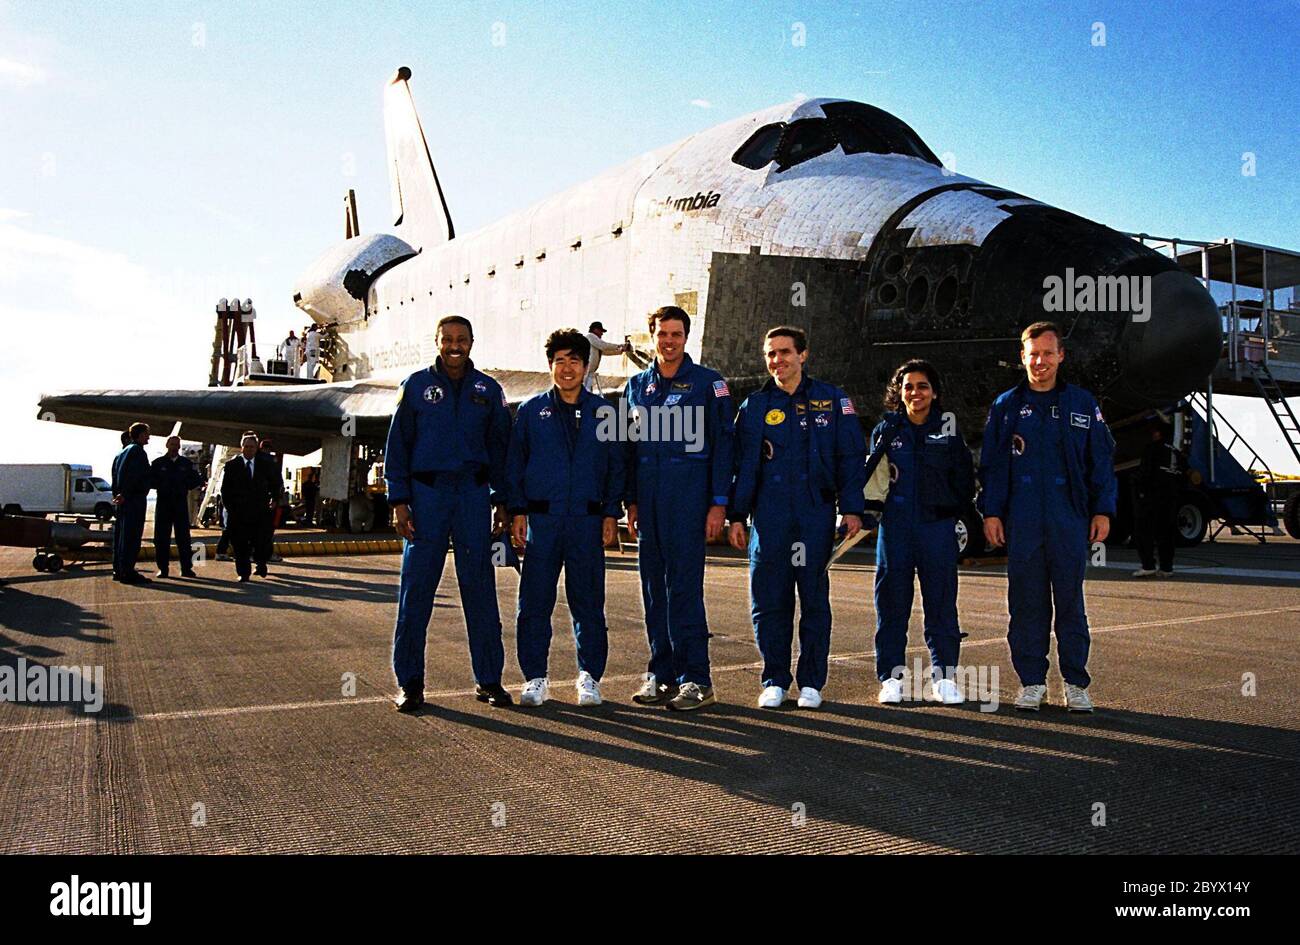 The STS-87 crew pose in front of the orbiter Columbia shortly after landing on Runway 33 at KSC's Shuttle Landing Facility. STS-87 concluded its mission with a main gear touchdown at 7:20:04 a.m. EST Dec. 5, drawing the 15-day, 16-hour and 34-minute-long mission of 6.5 million miles to a close. From left to right are Mission Specialists Winston Scott and Takao Doi, Ph.D., of the National Space Development Agency of Japan; Commander Kevin Kregel; Payload Specialist Leonid Kadenyuk of the National Space Agency of Ukraine; Mission Specialist Kalpana Chawla, Ph.D.; and Pilot Steven Lindsey. During Stock Photo